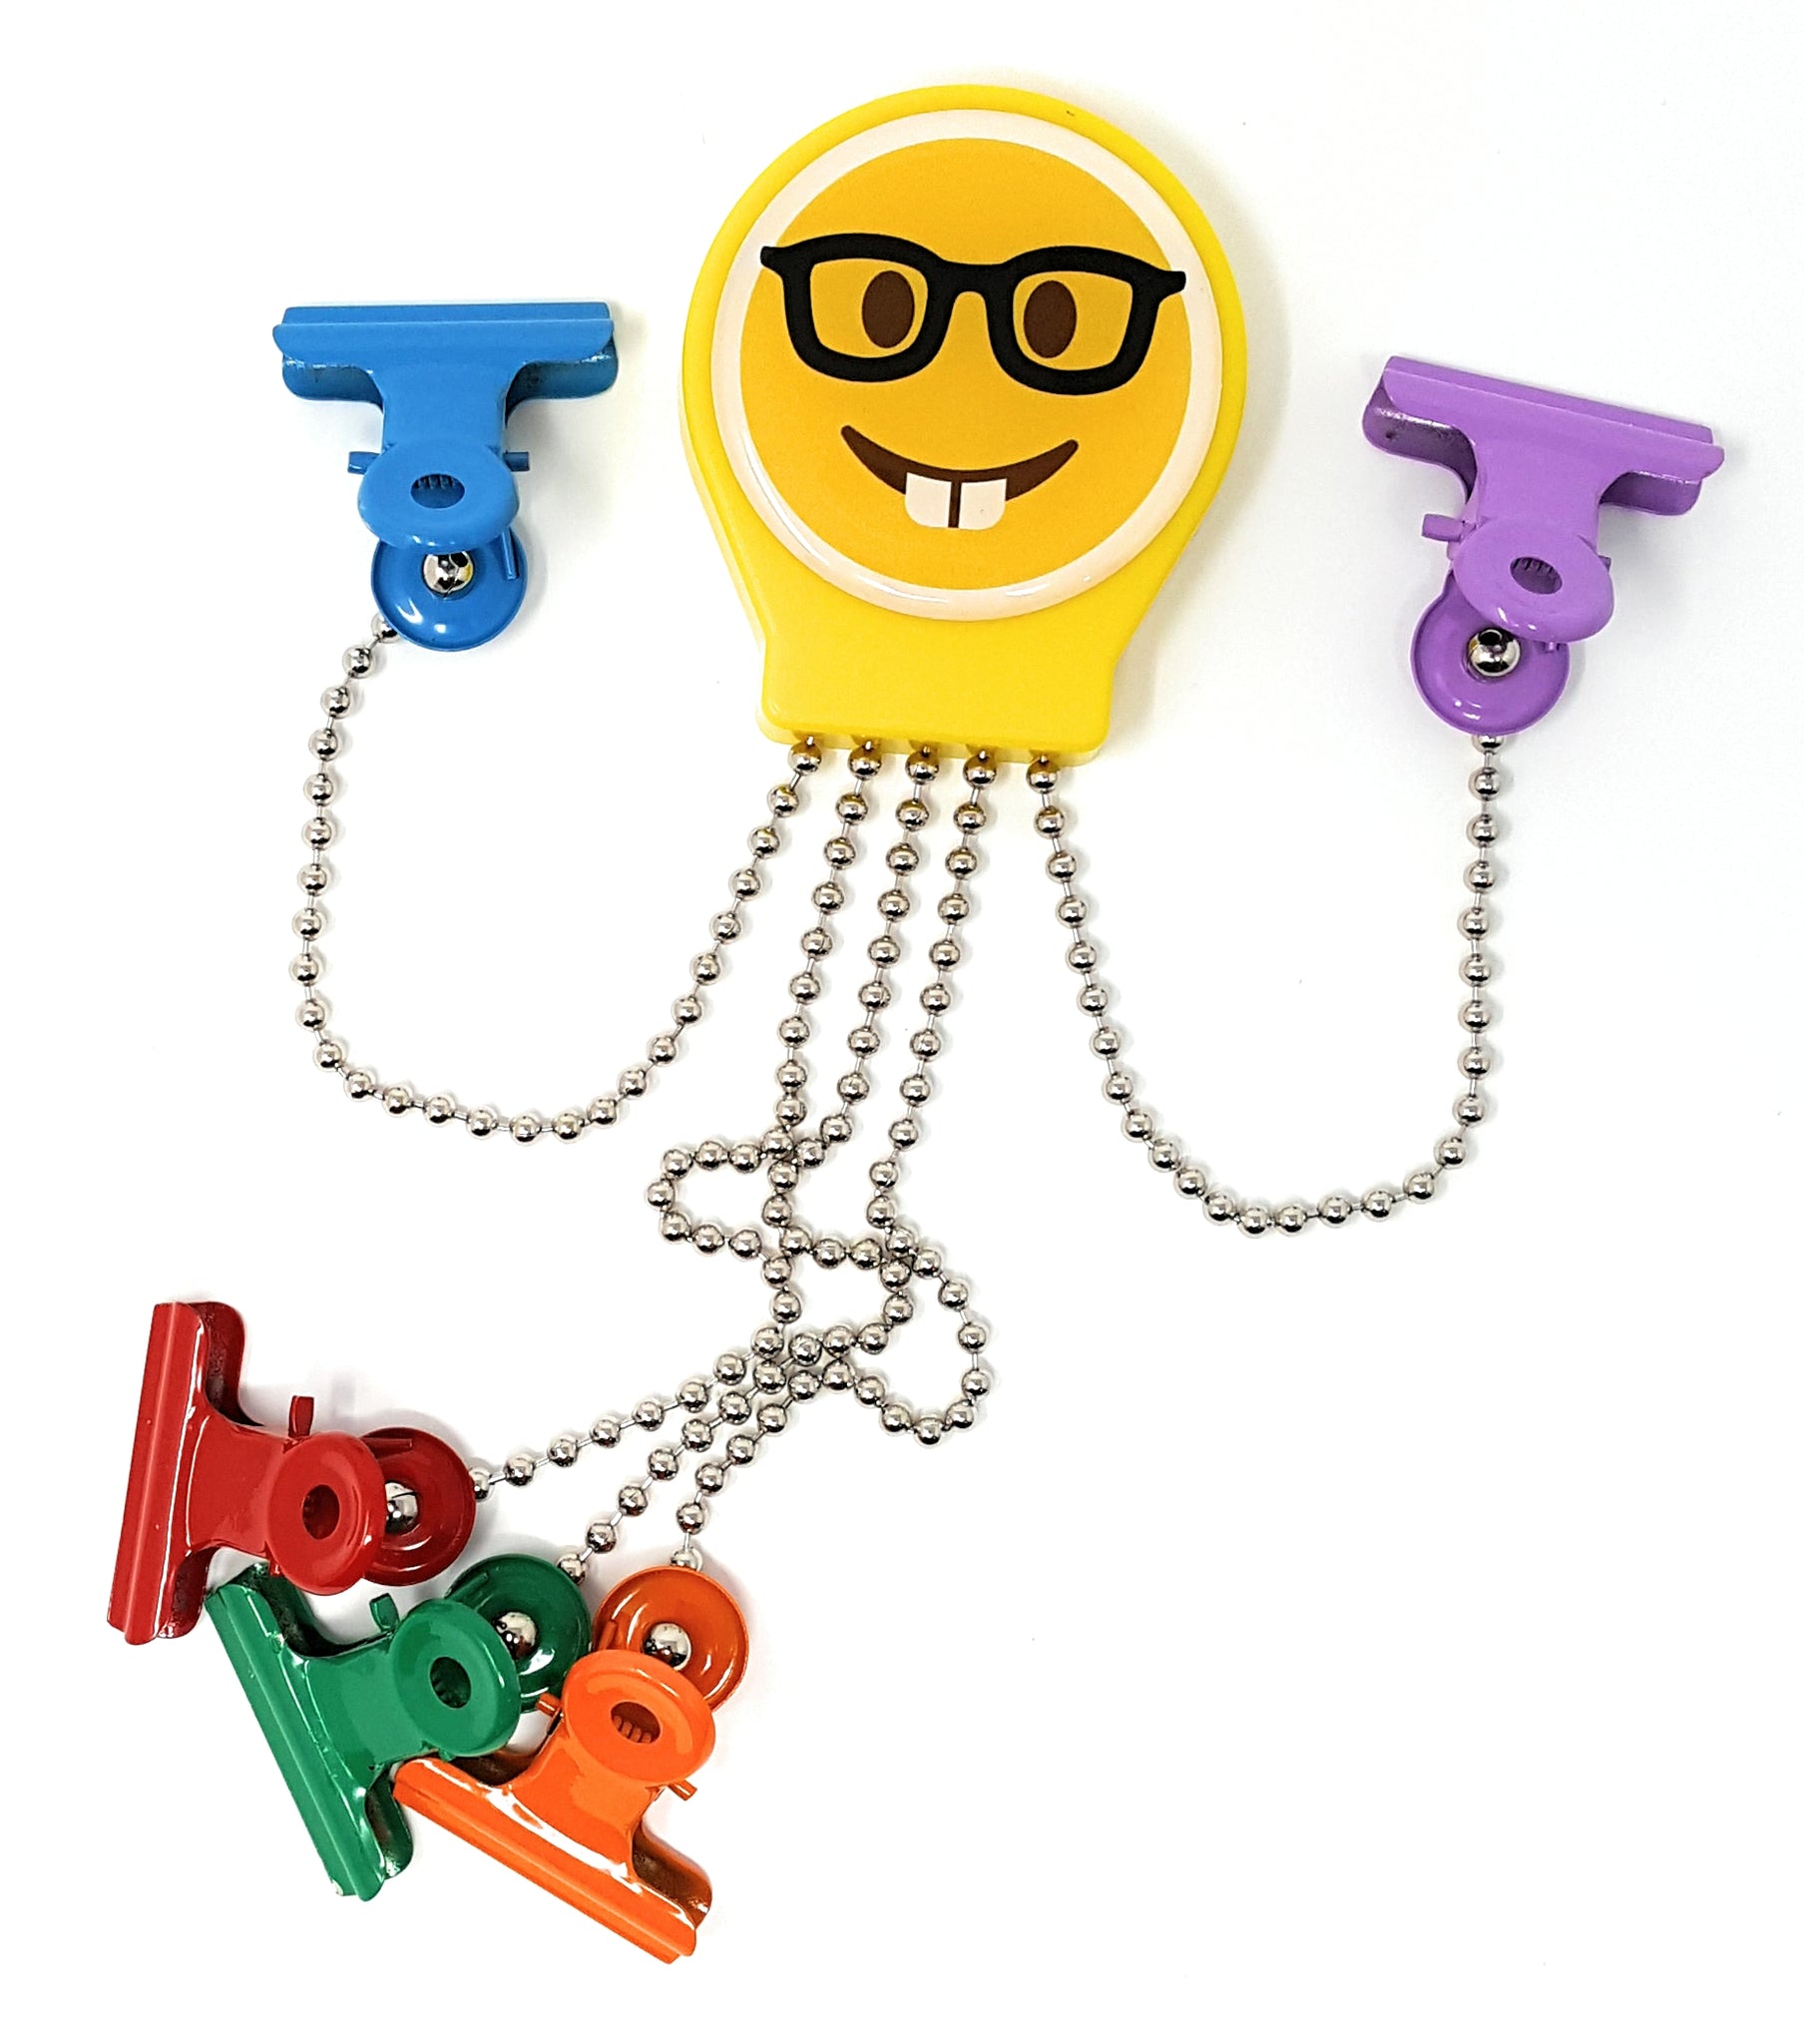 OctoClip Refrigerator Magnet – Nerd Emoji with Multi Colored Clips